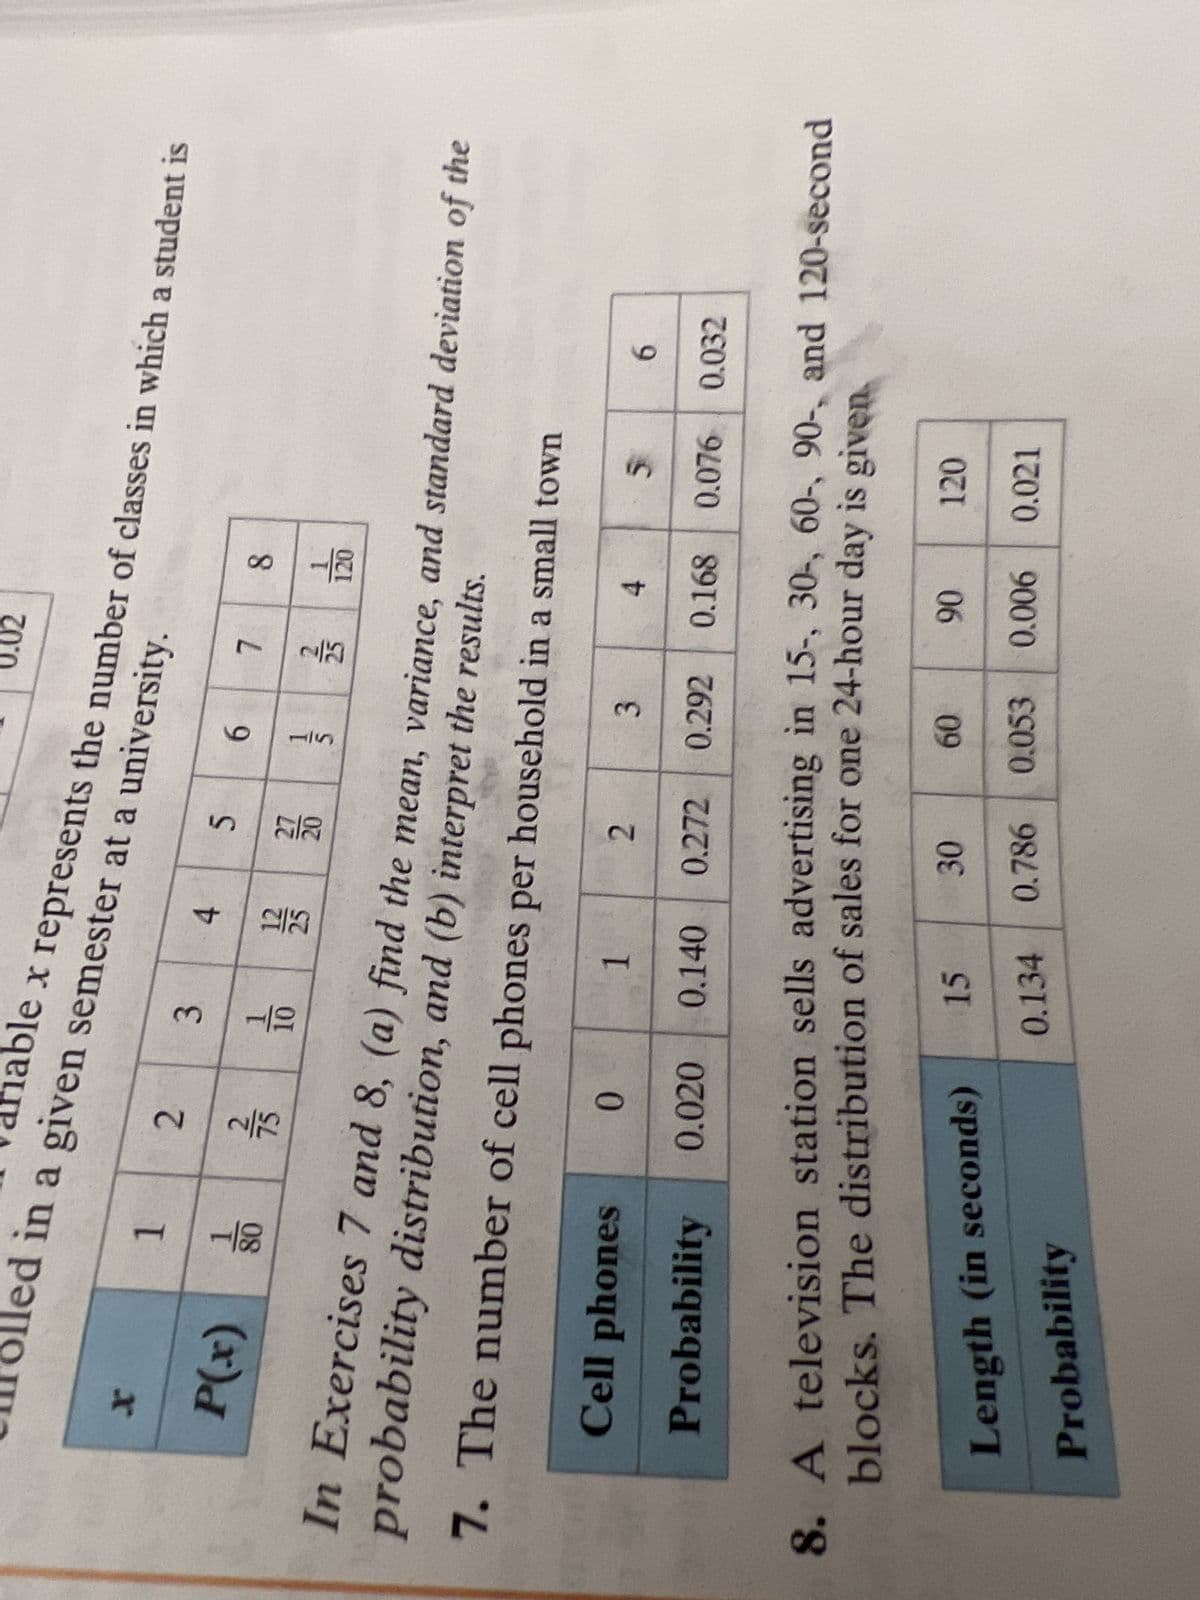 x
Ullolled in a given semester at a university.
1
P(x) 30
80
2
7/7/15 1/0 끓
driable x represents the number of classes in which a student is
Cell phones 0
Probability
probability distribution, and (b) interpret the results.
In Exercises 7 and 8, (a) find the mean, variance, and standard deviation of the
7. The number of cell phones per household in a small town
3
4 5
6
7 8
10 12/25 %/10 3/20 12/13 12/0
0.02
Length (in seconds)
Probability
2
3
5
6
1
0.020 0.140 0.272 0.292 0.168 0.076 0.032
15
8. A television station sells advertising in 15-, 30-, 60-, 90-, and 120-second
blocks. The distribution of sales for one 24-hour day is given.
0.134
4
30
60
0.786 0.053
90
0.006
120
0.021